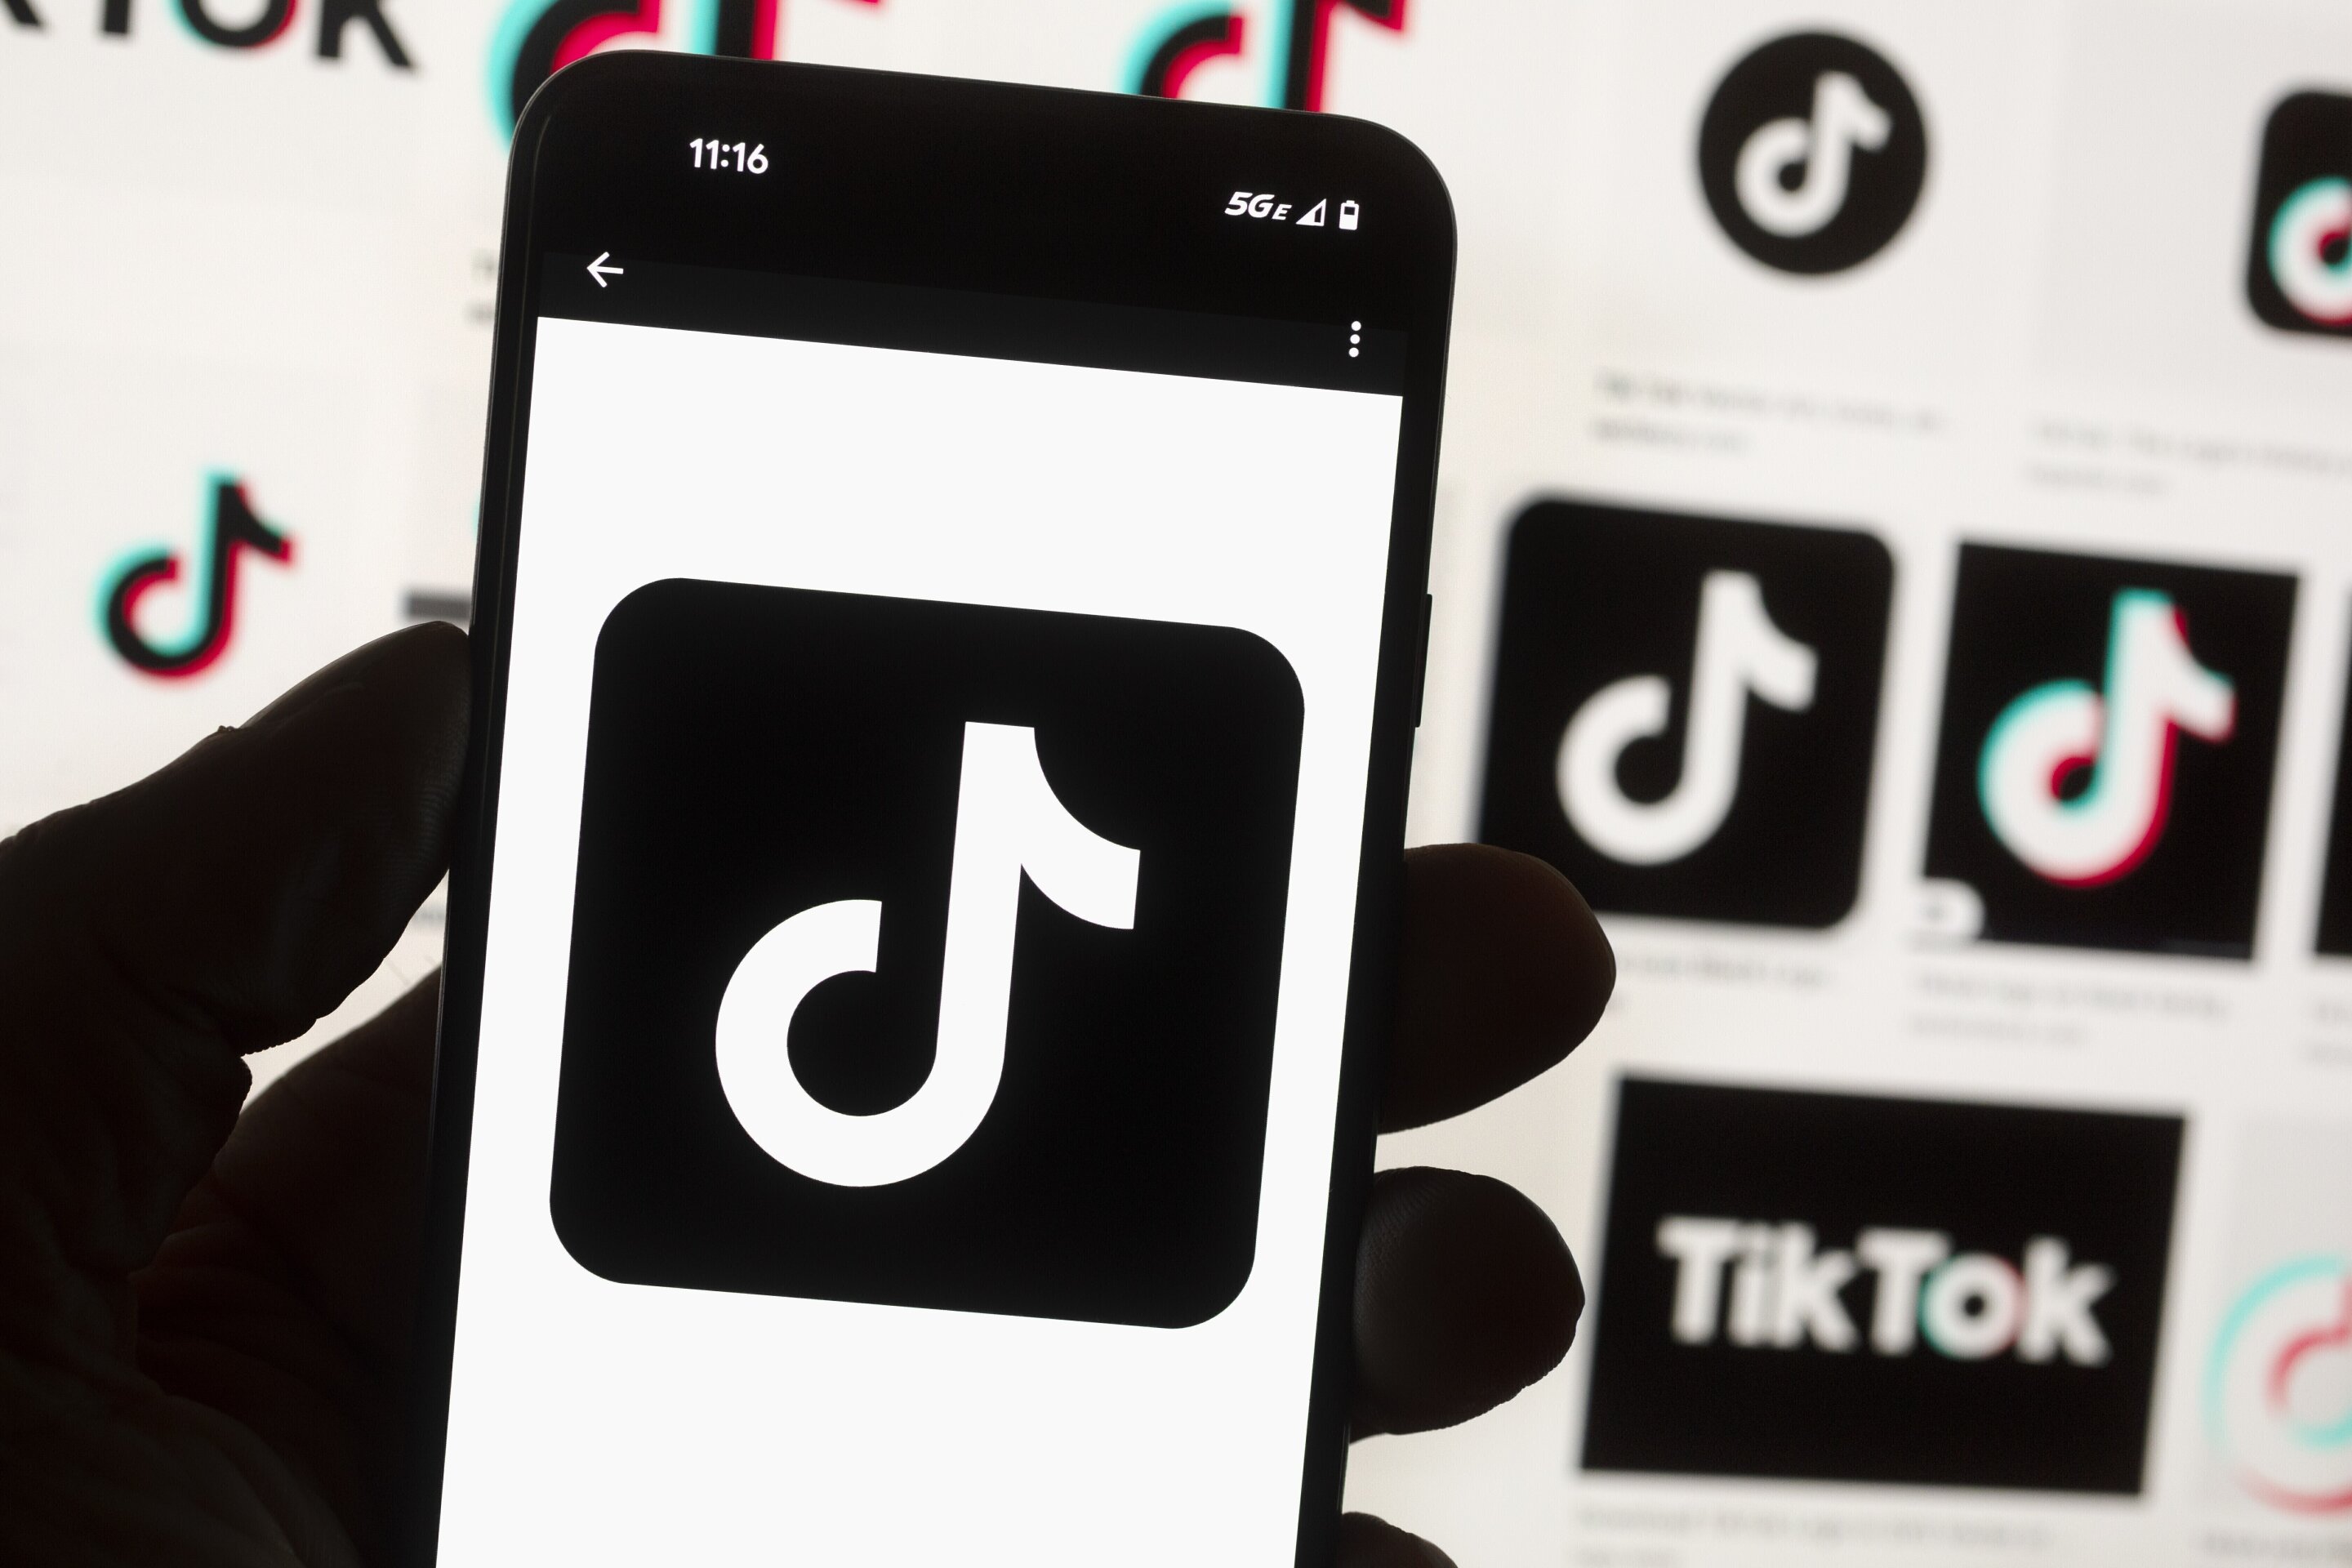 #Maryland bans TikTok in state agencies, latest state to act